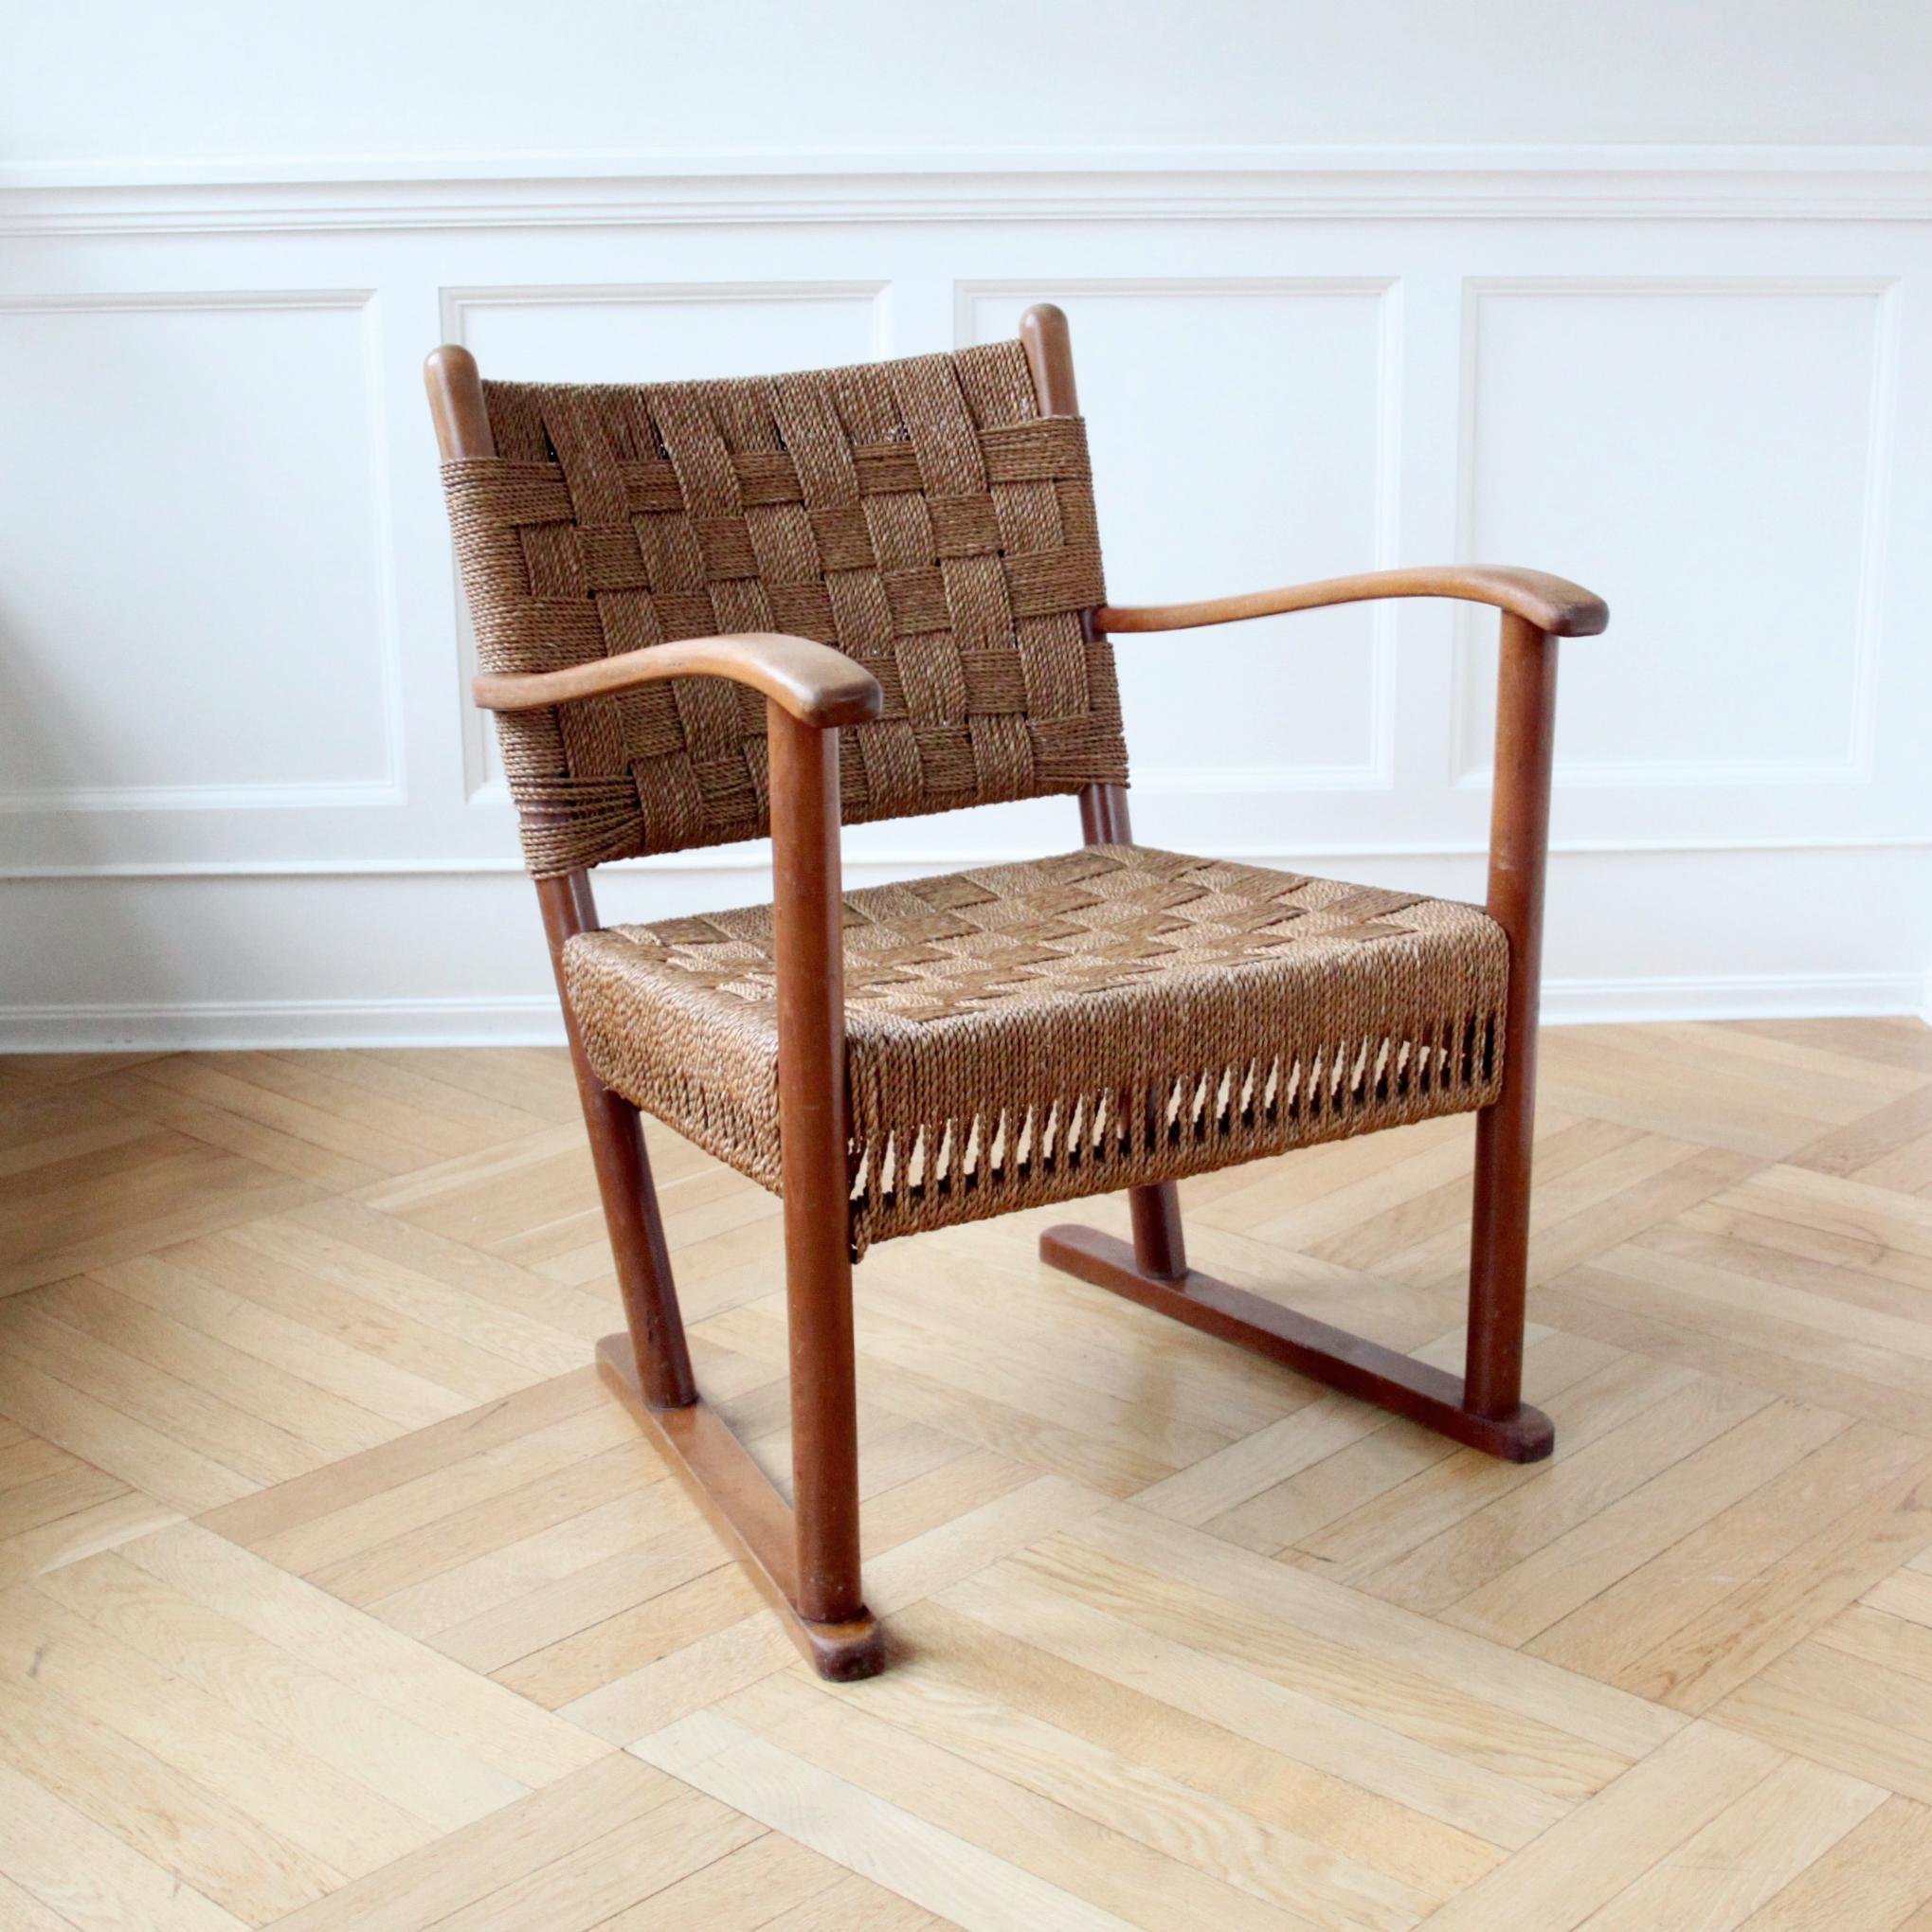 1940s chair